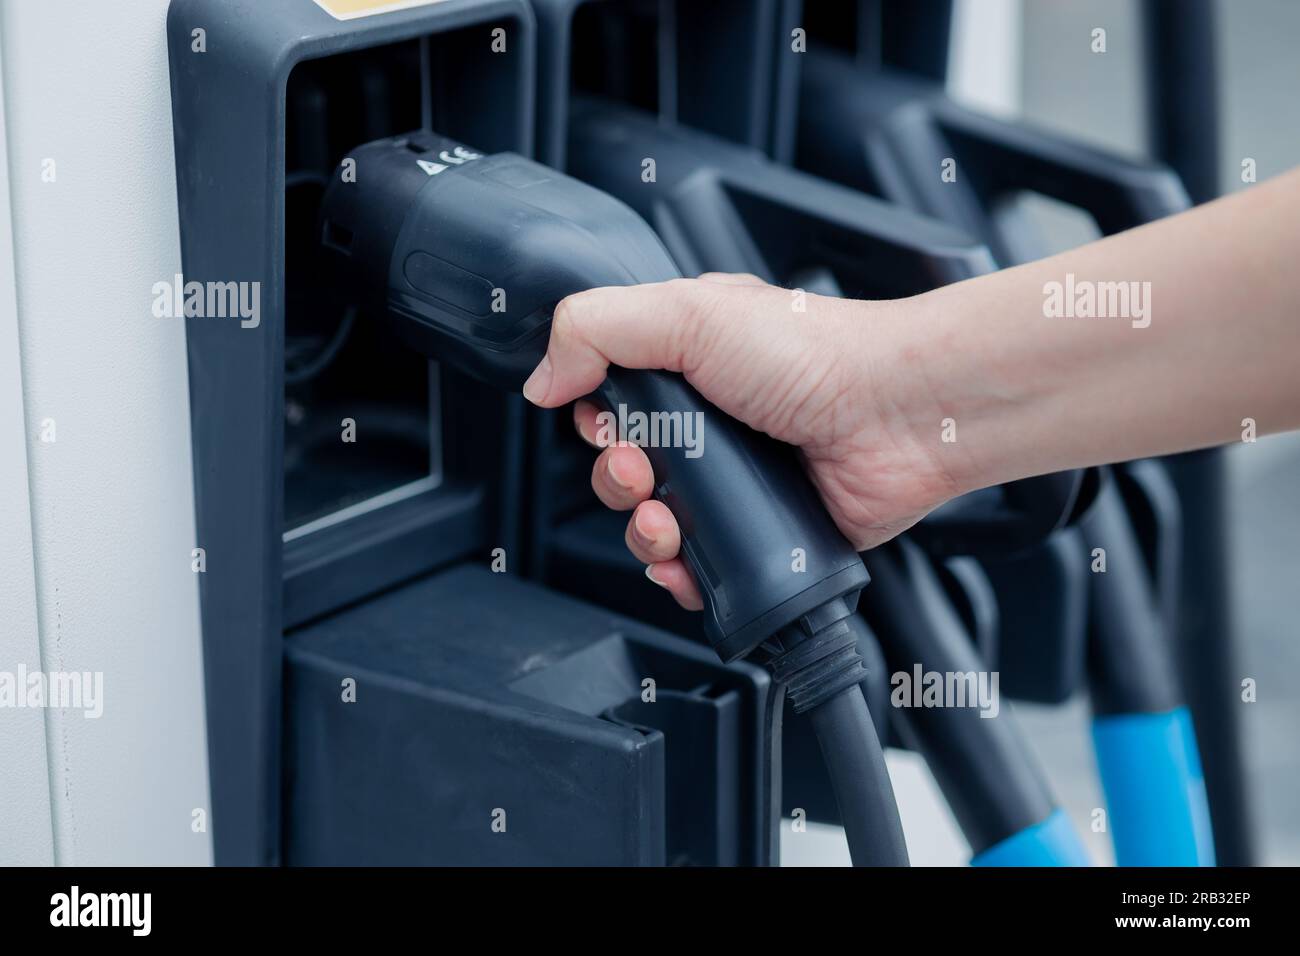 charging EV car electric vehicle clean energy for driving future. hand holding charger head station. Stock Photo